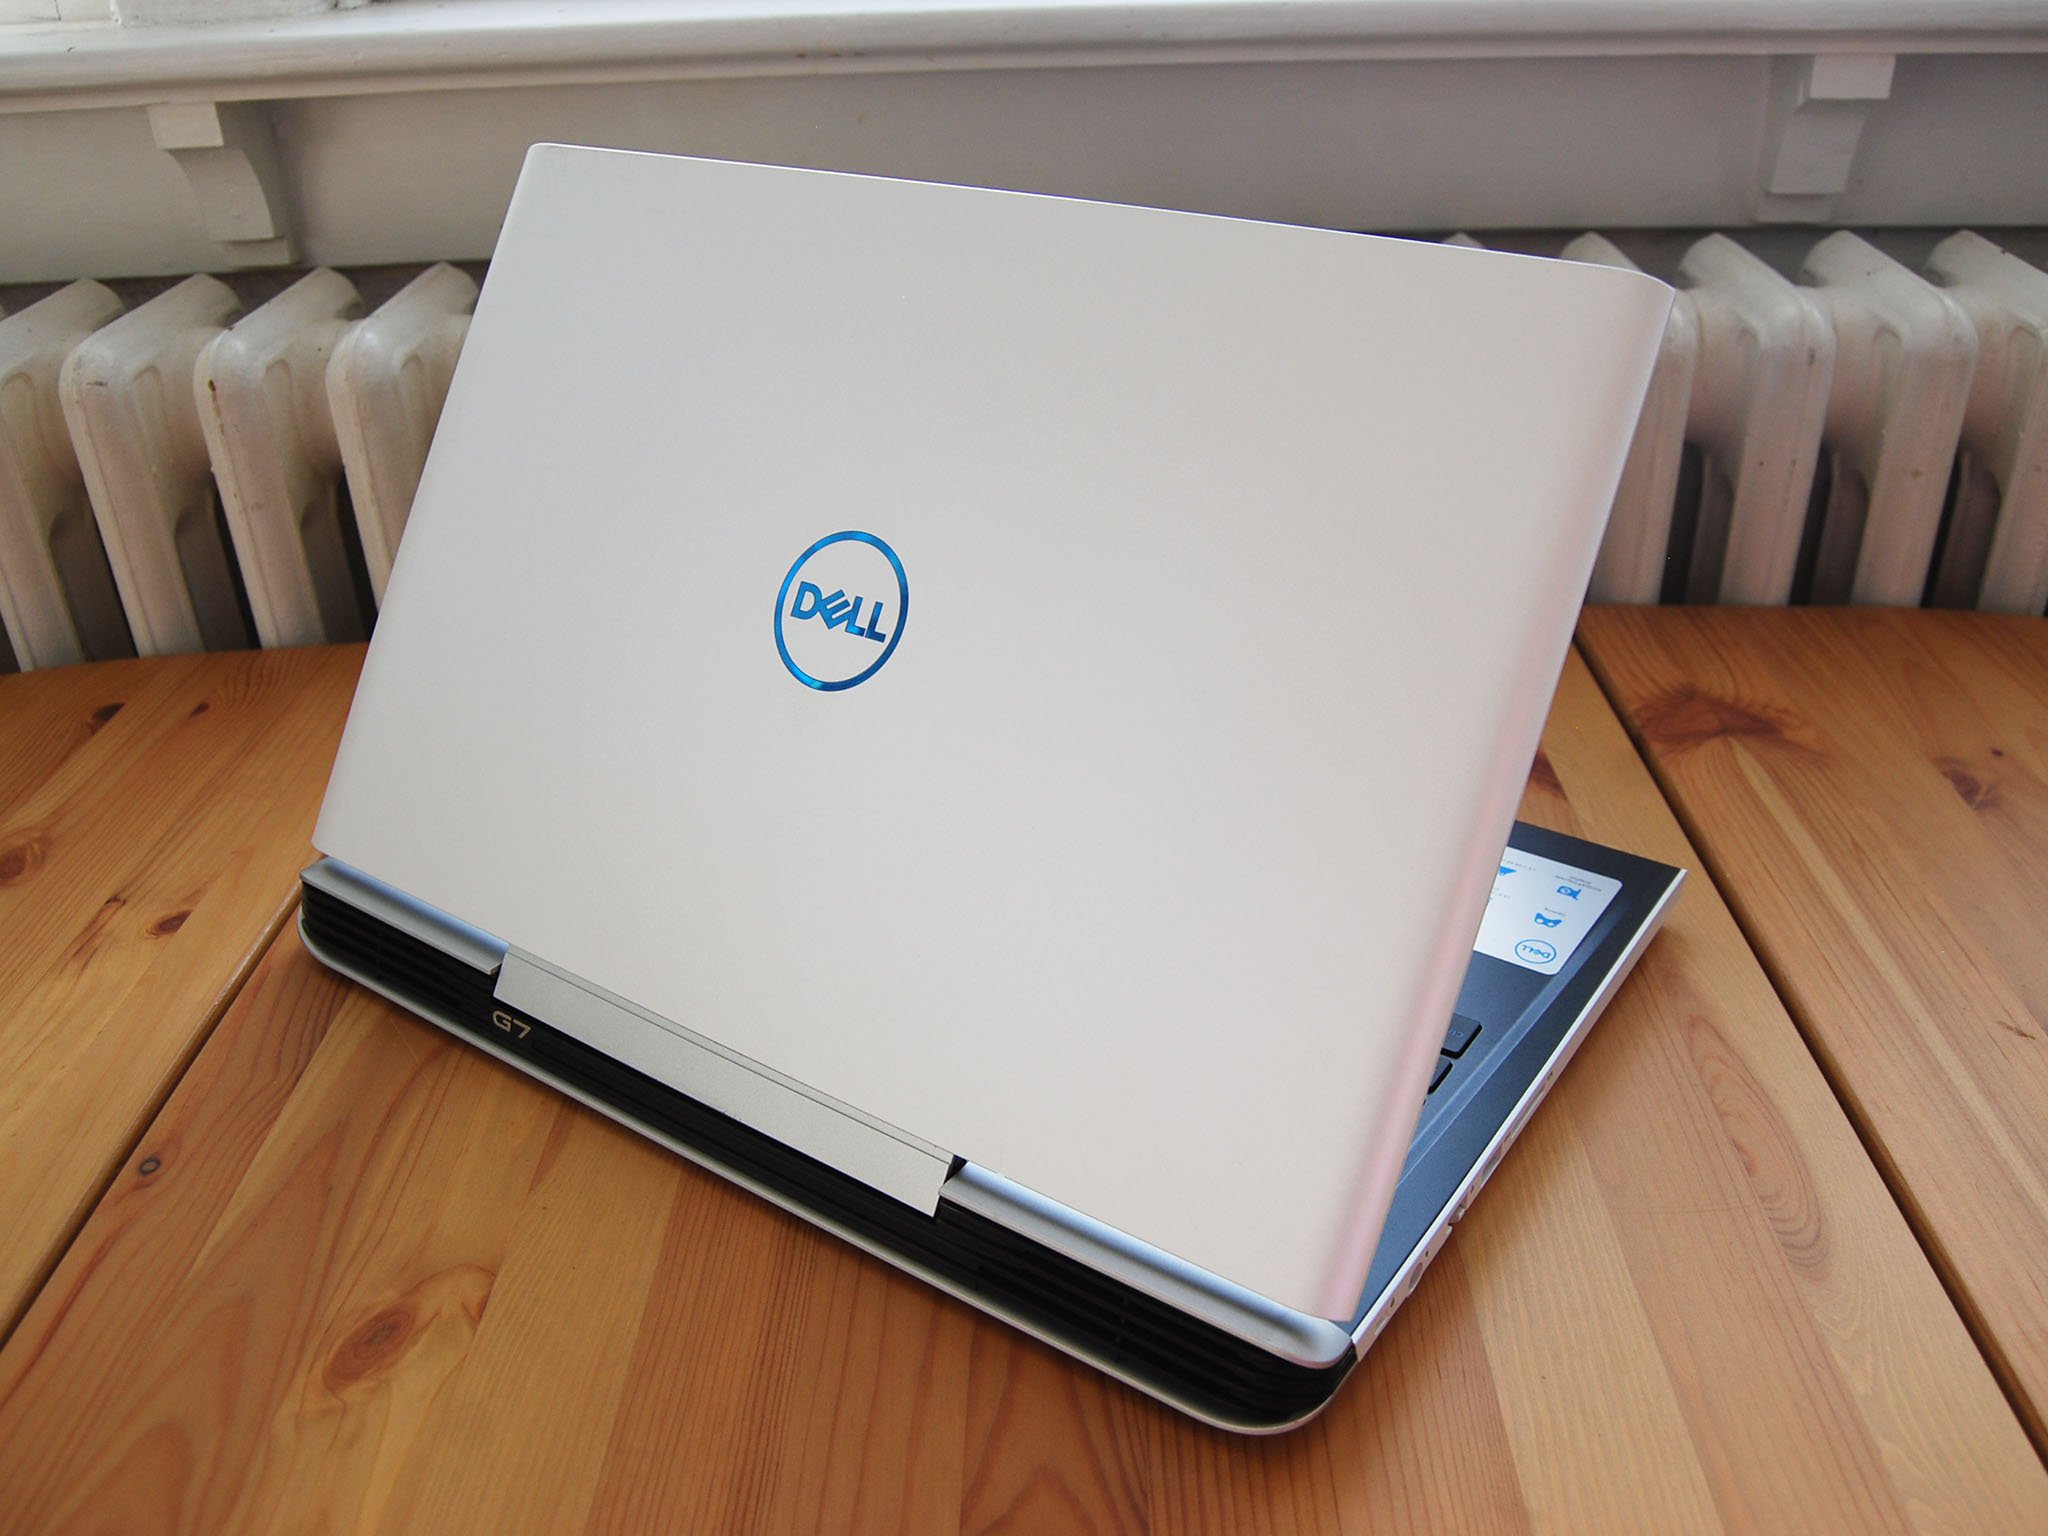 Dell G7 15 7588 review: Budget gaming laptop with impressive